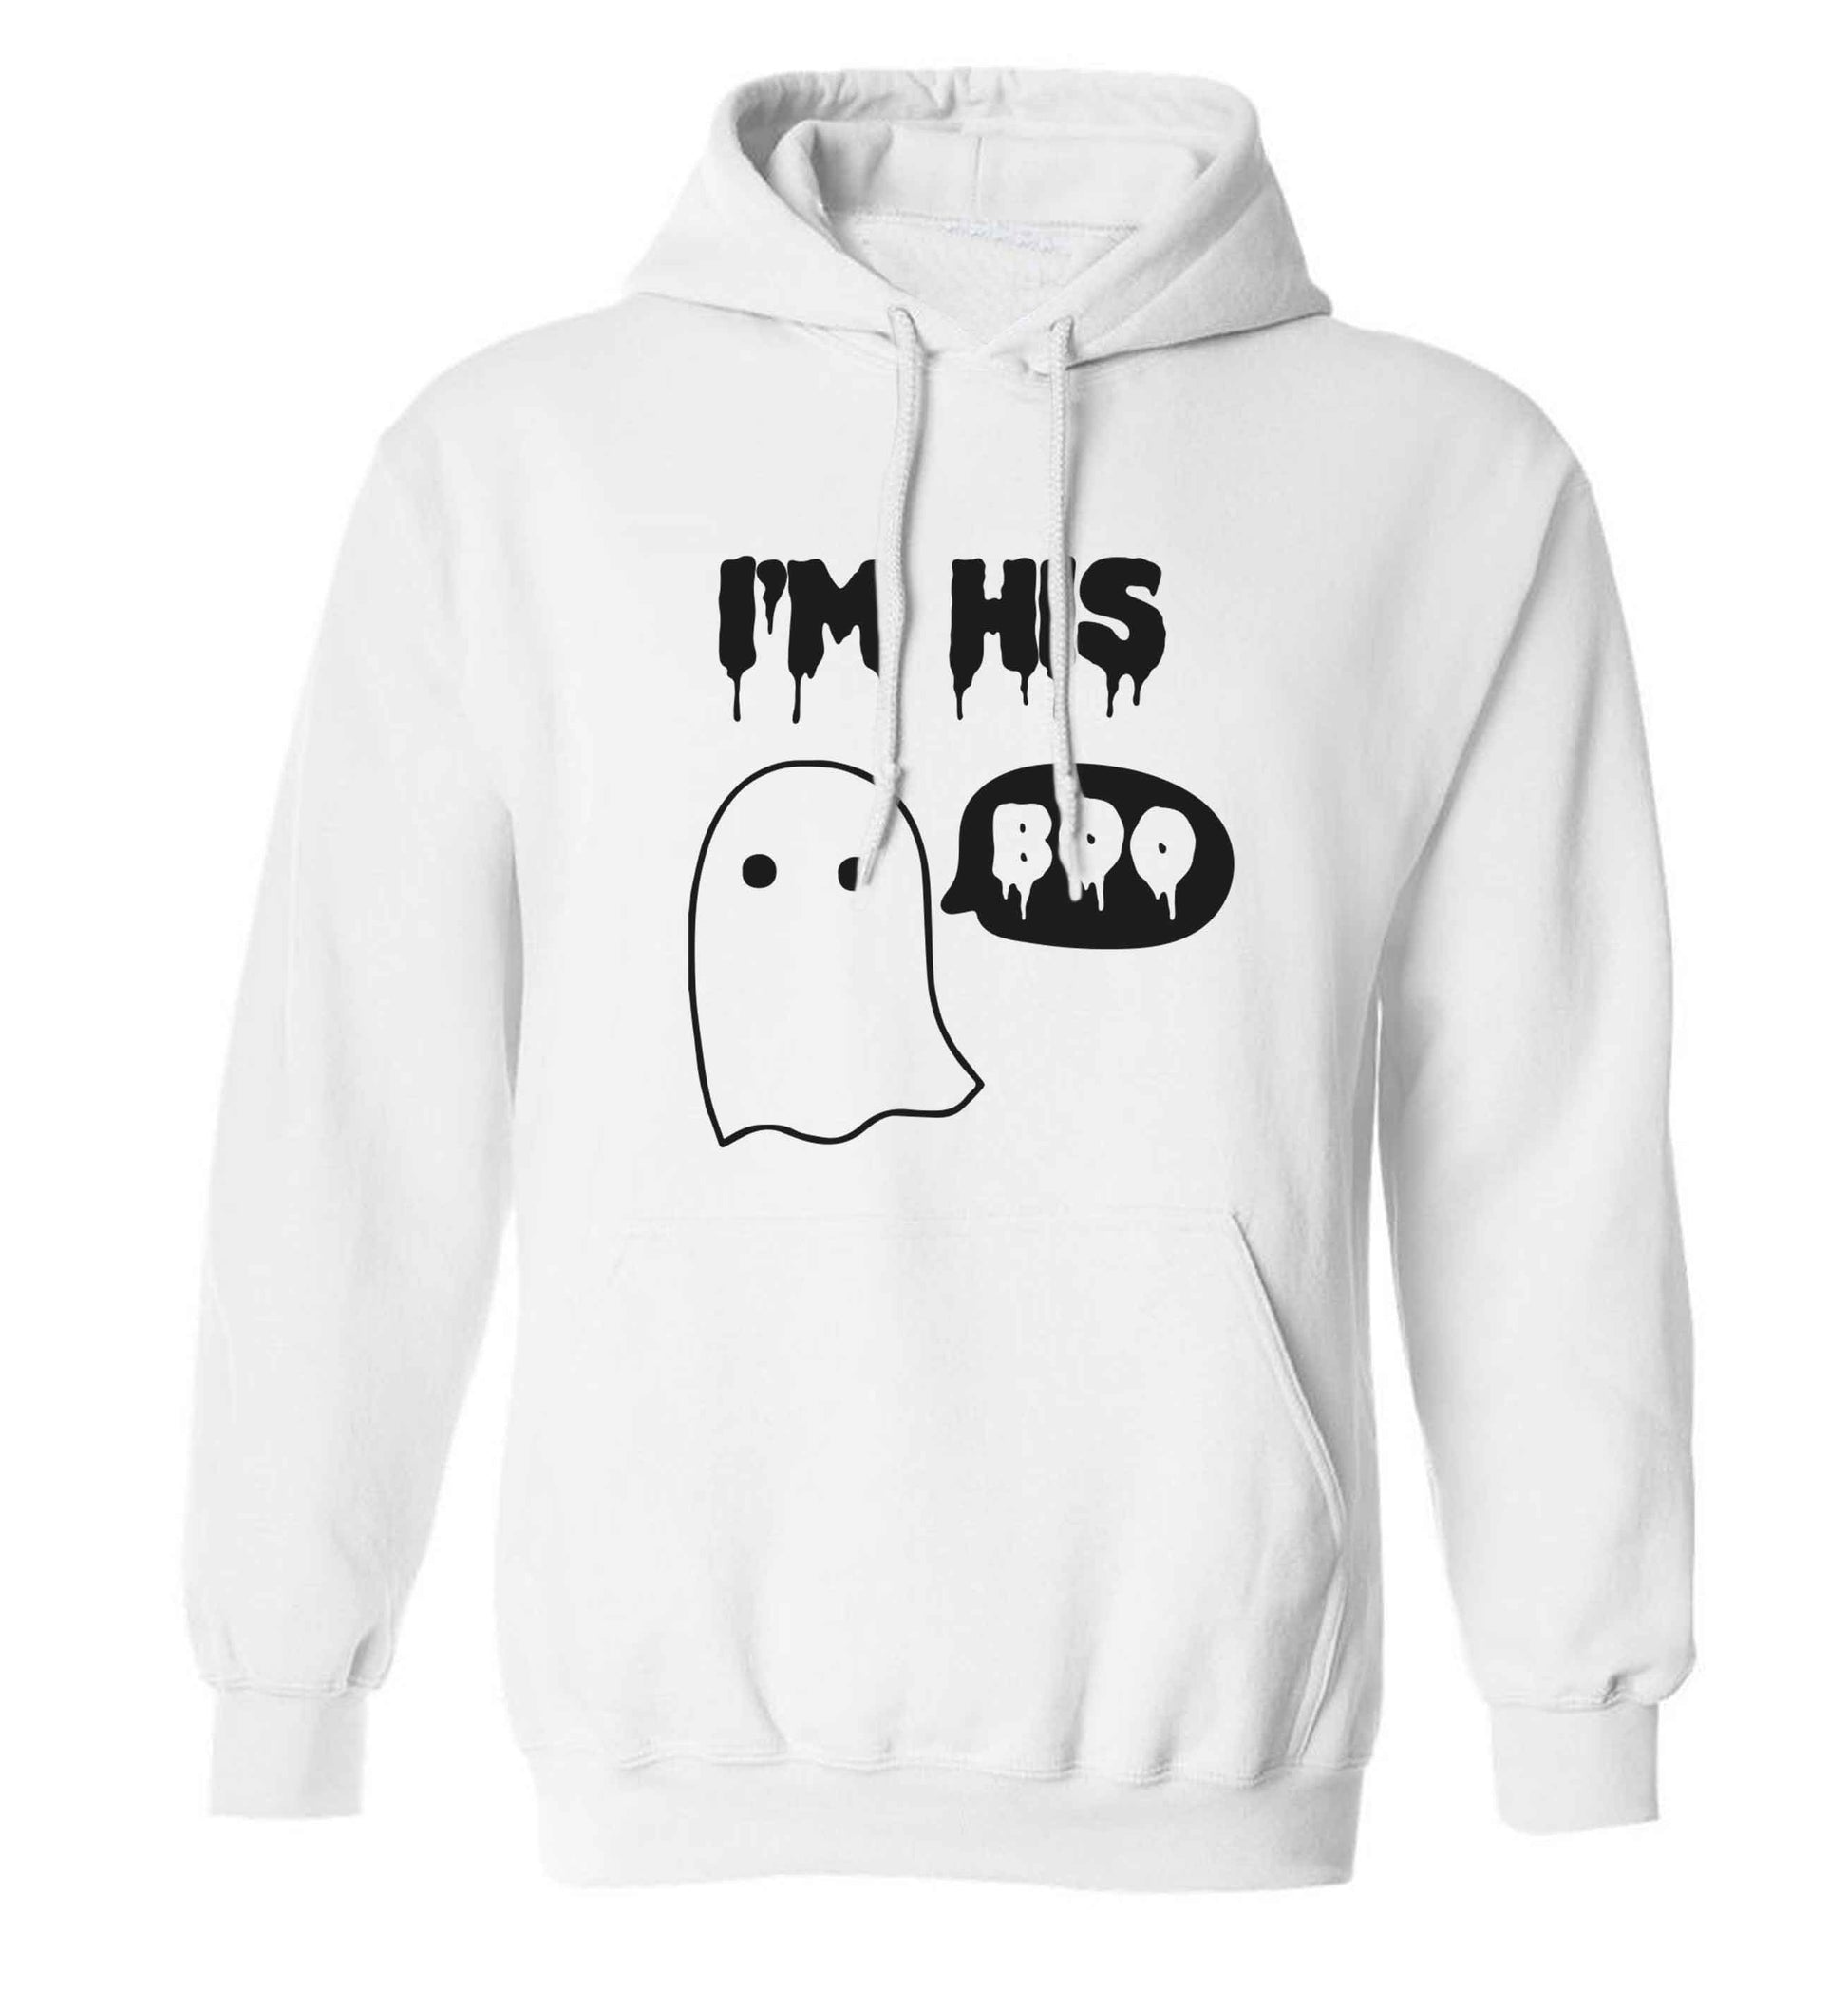 I'm his boo adults unisex white hoodie 2XL